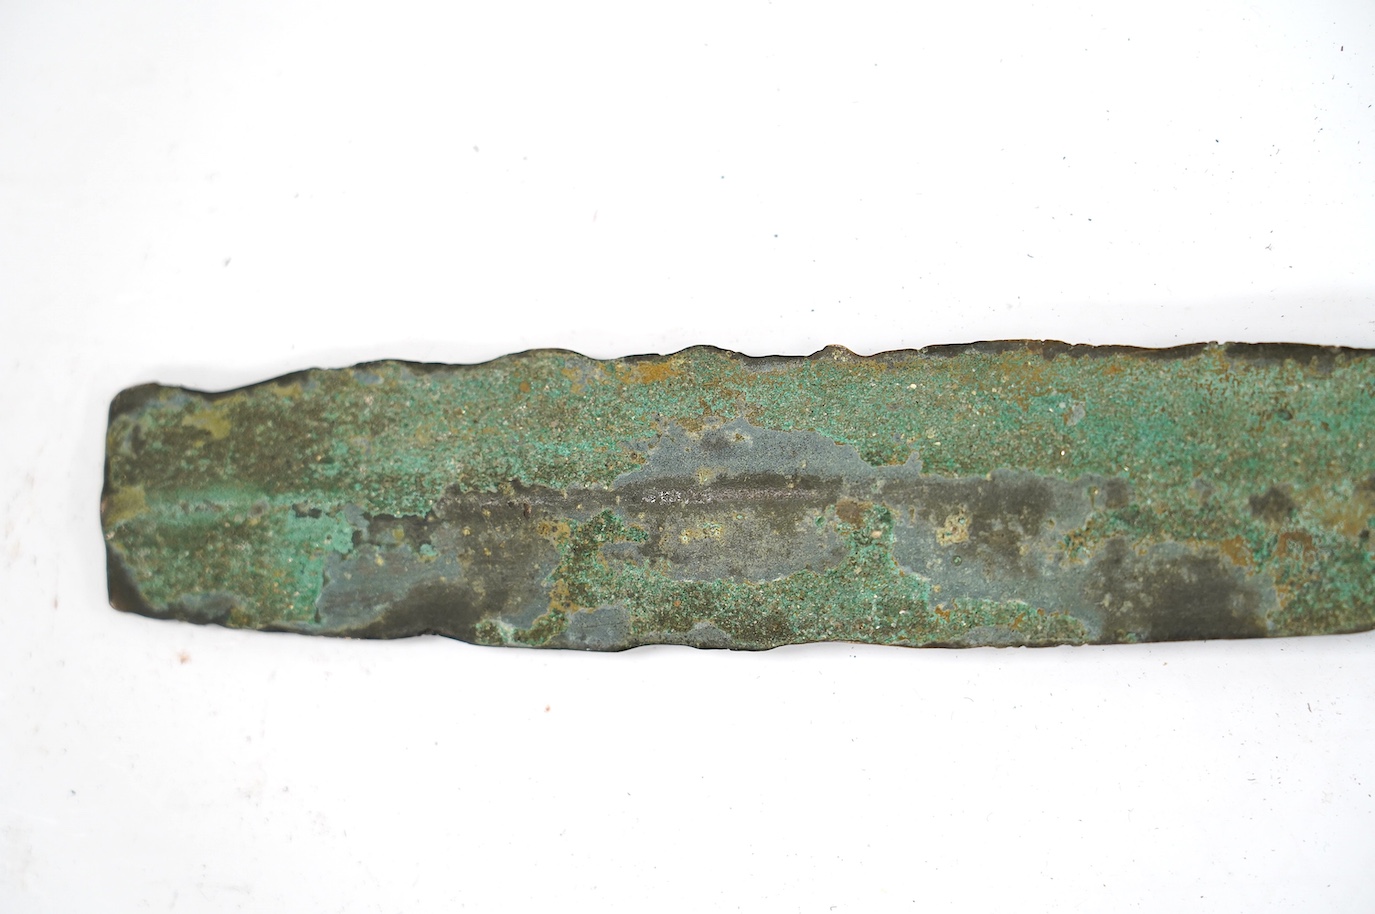 A Bronze Age (c.3200-2800BC) dagger from the Lurestan region of Western Iran, blade 37cm. Condition - fair excavated condition.